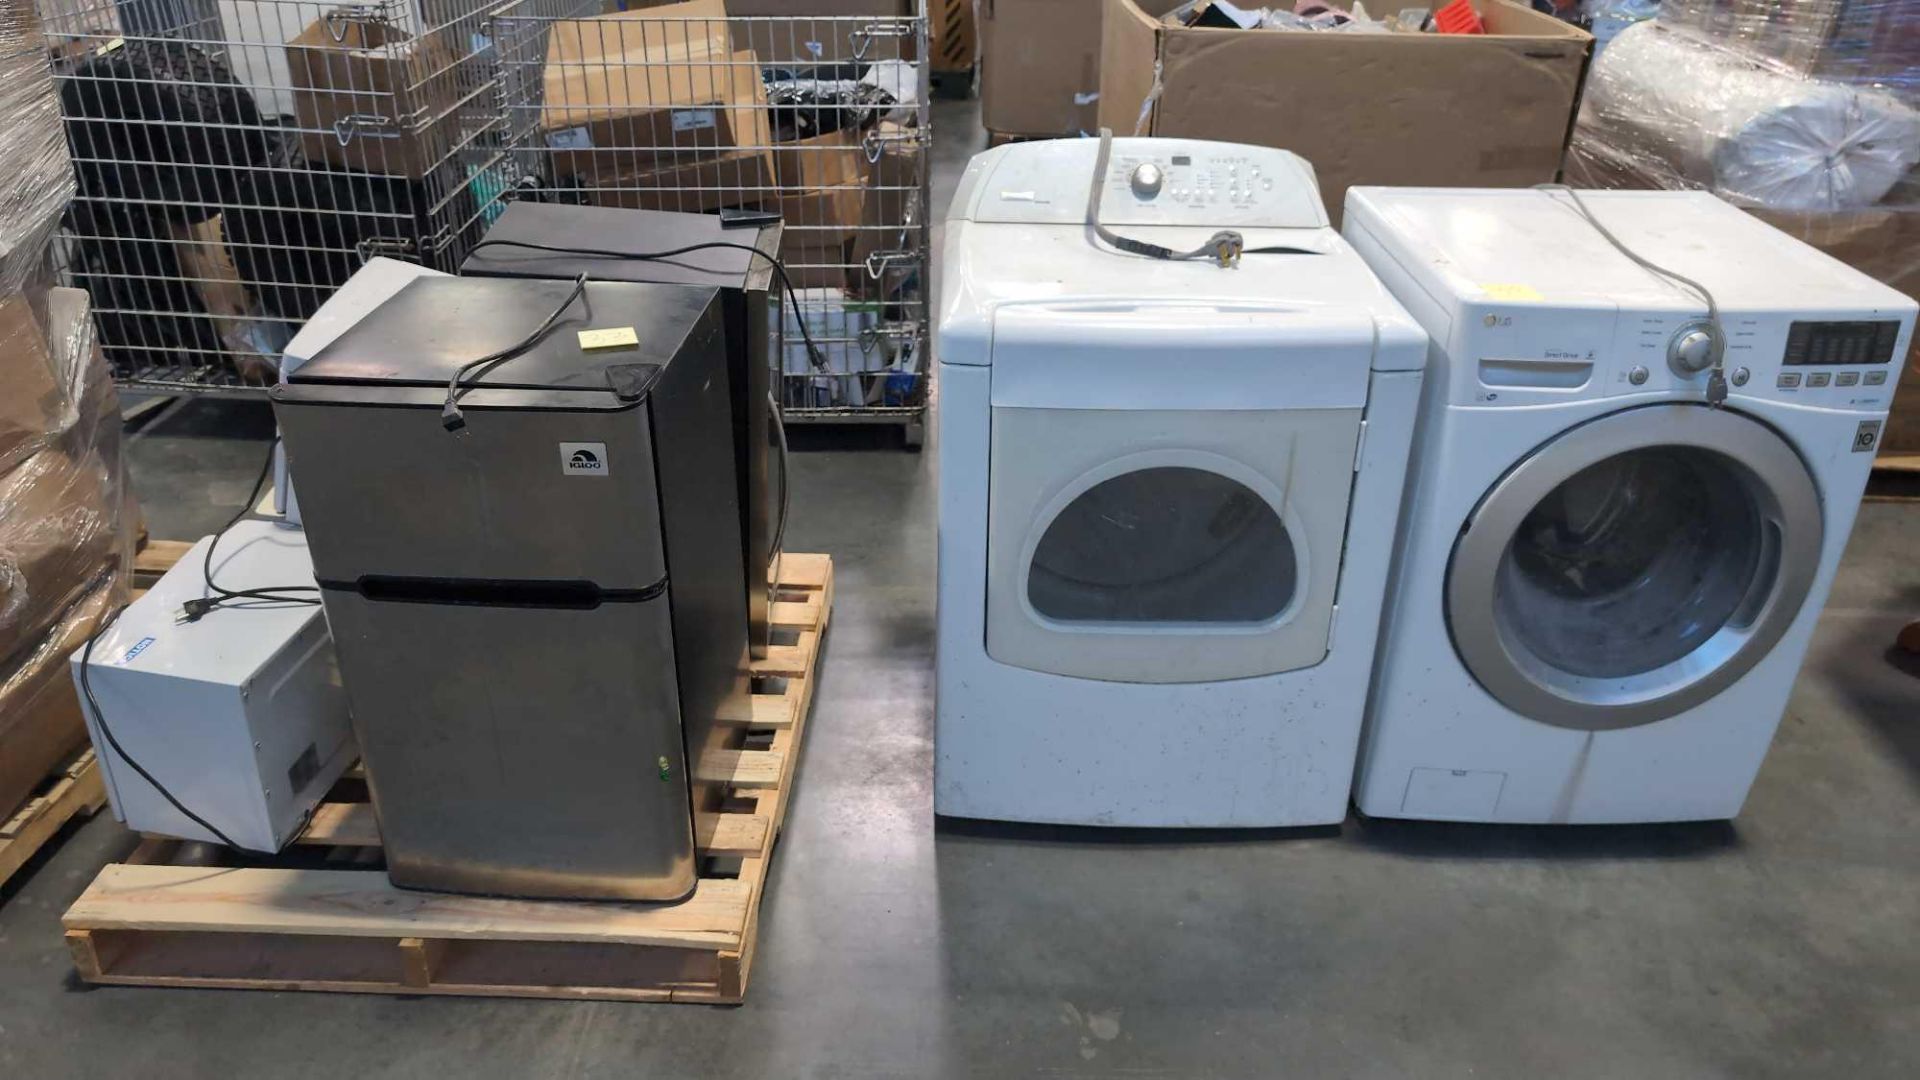 used washer and dryer, smaller fridge and other various appliances